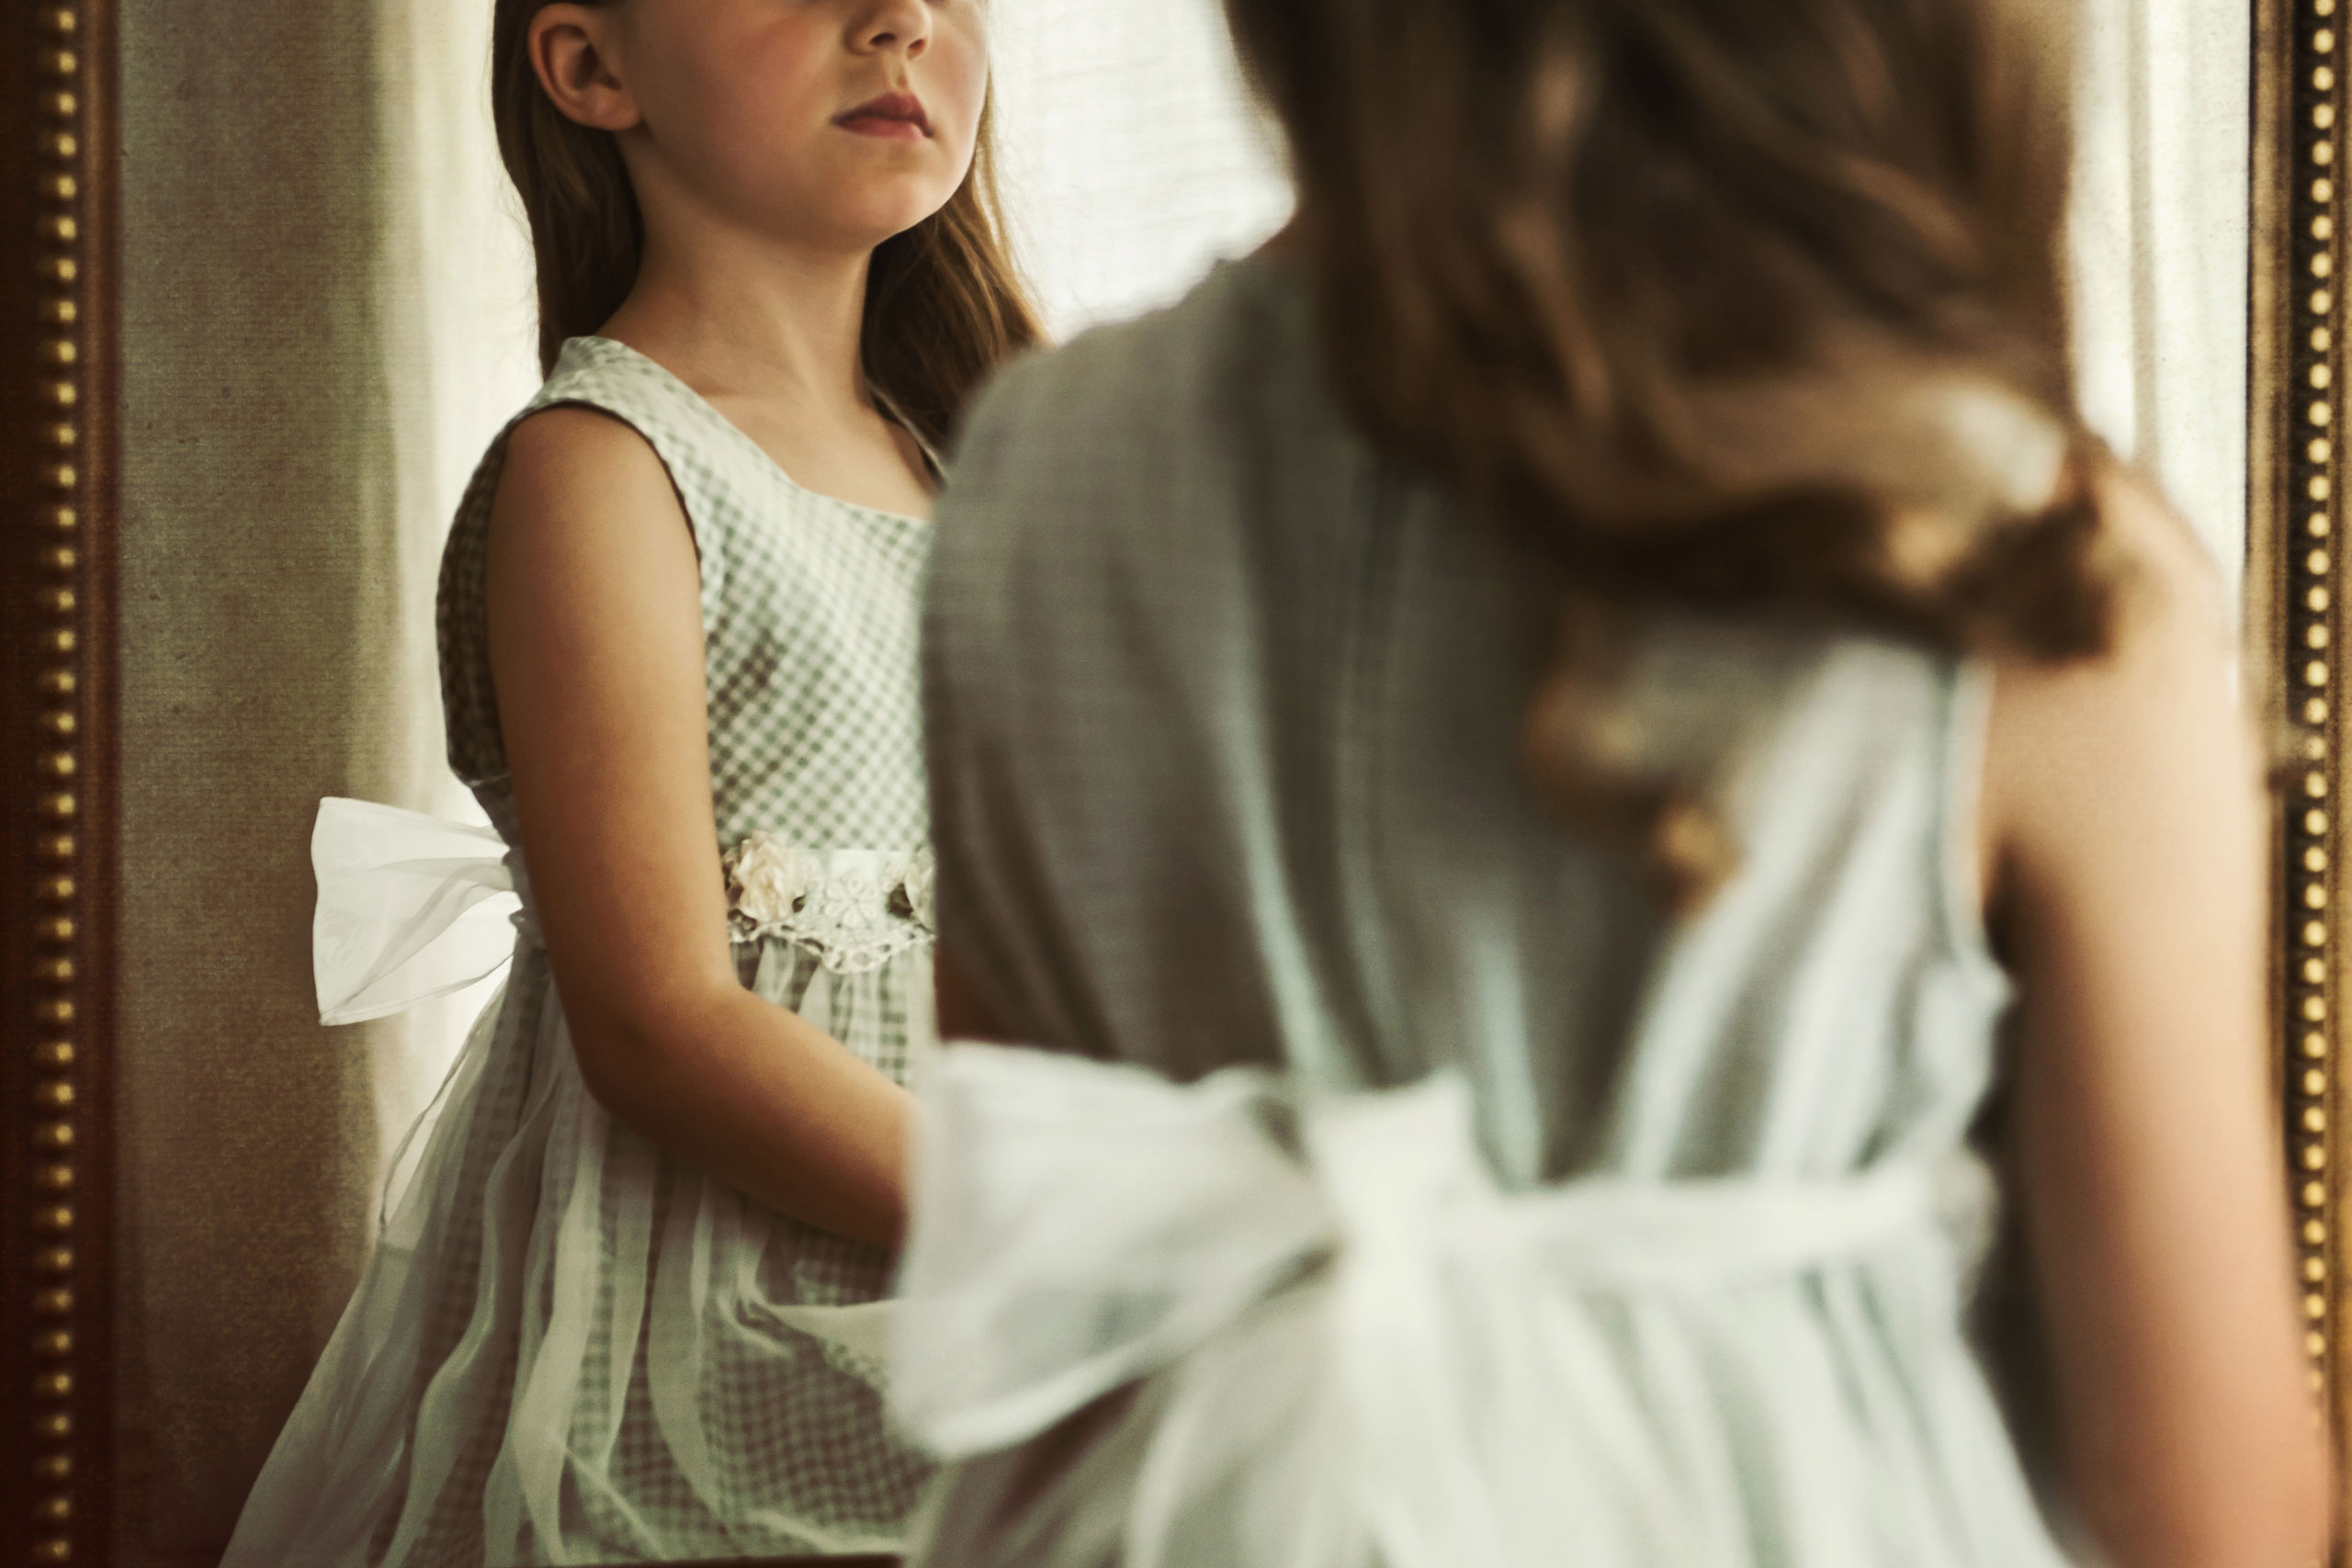 A young girl's reflection in the mirror